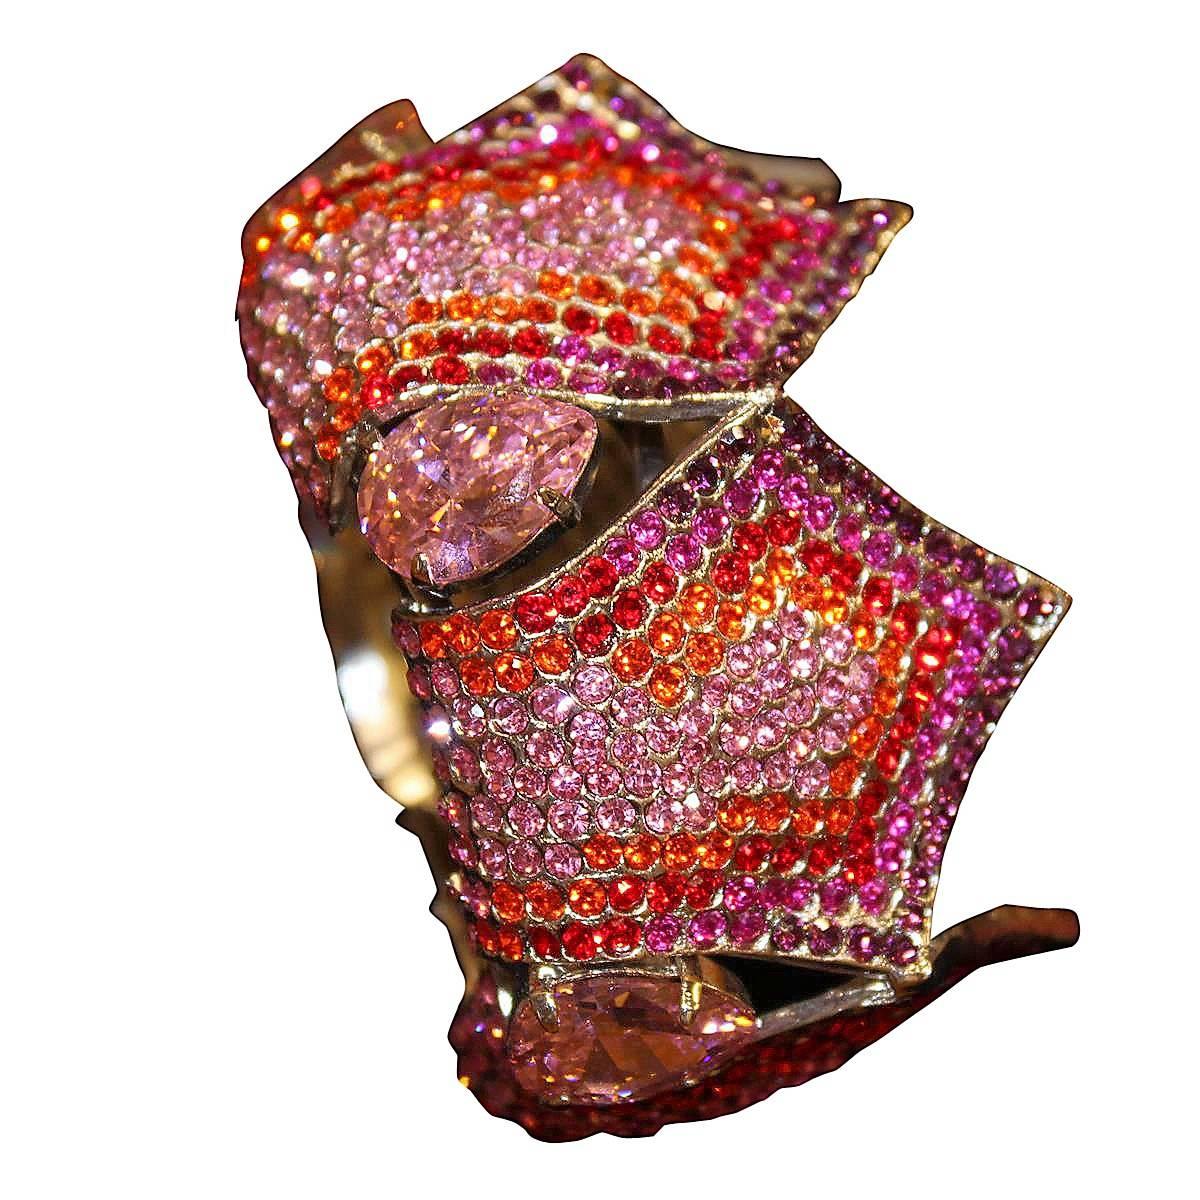 Wonderful colors for this Zini bracelet
One of the greatest world bijoux designers
Non allergenic rhodium
Amazing hand creation of crystals, rhinestones and resins
Multicolored
Total width cm 5 (1.96 inches)
Wrist cm 17 (6.69 inches)
100% Artisanal